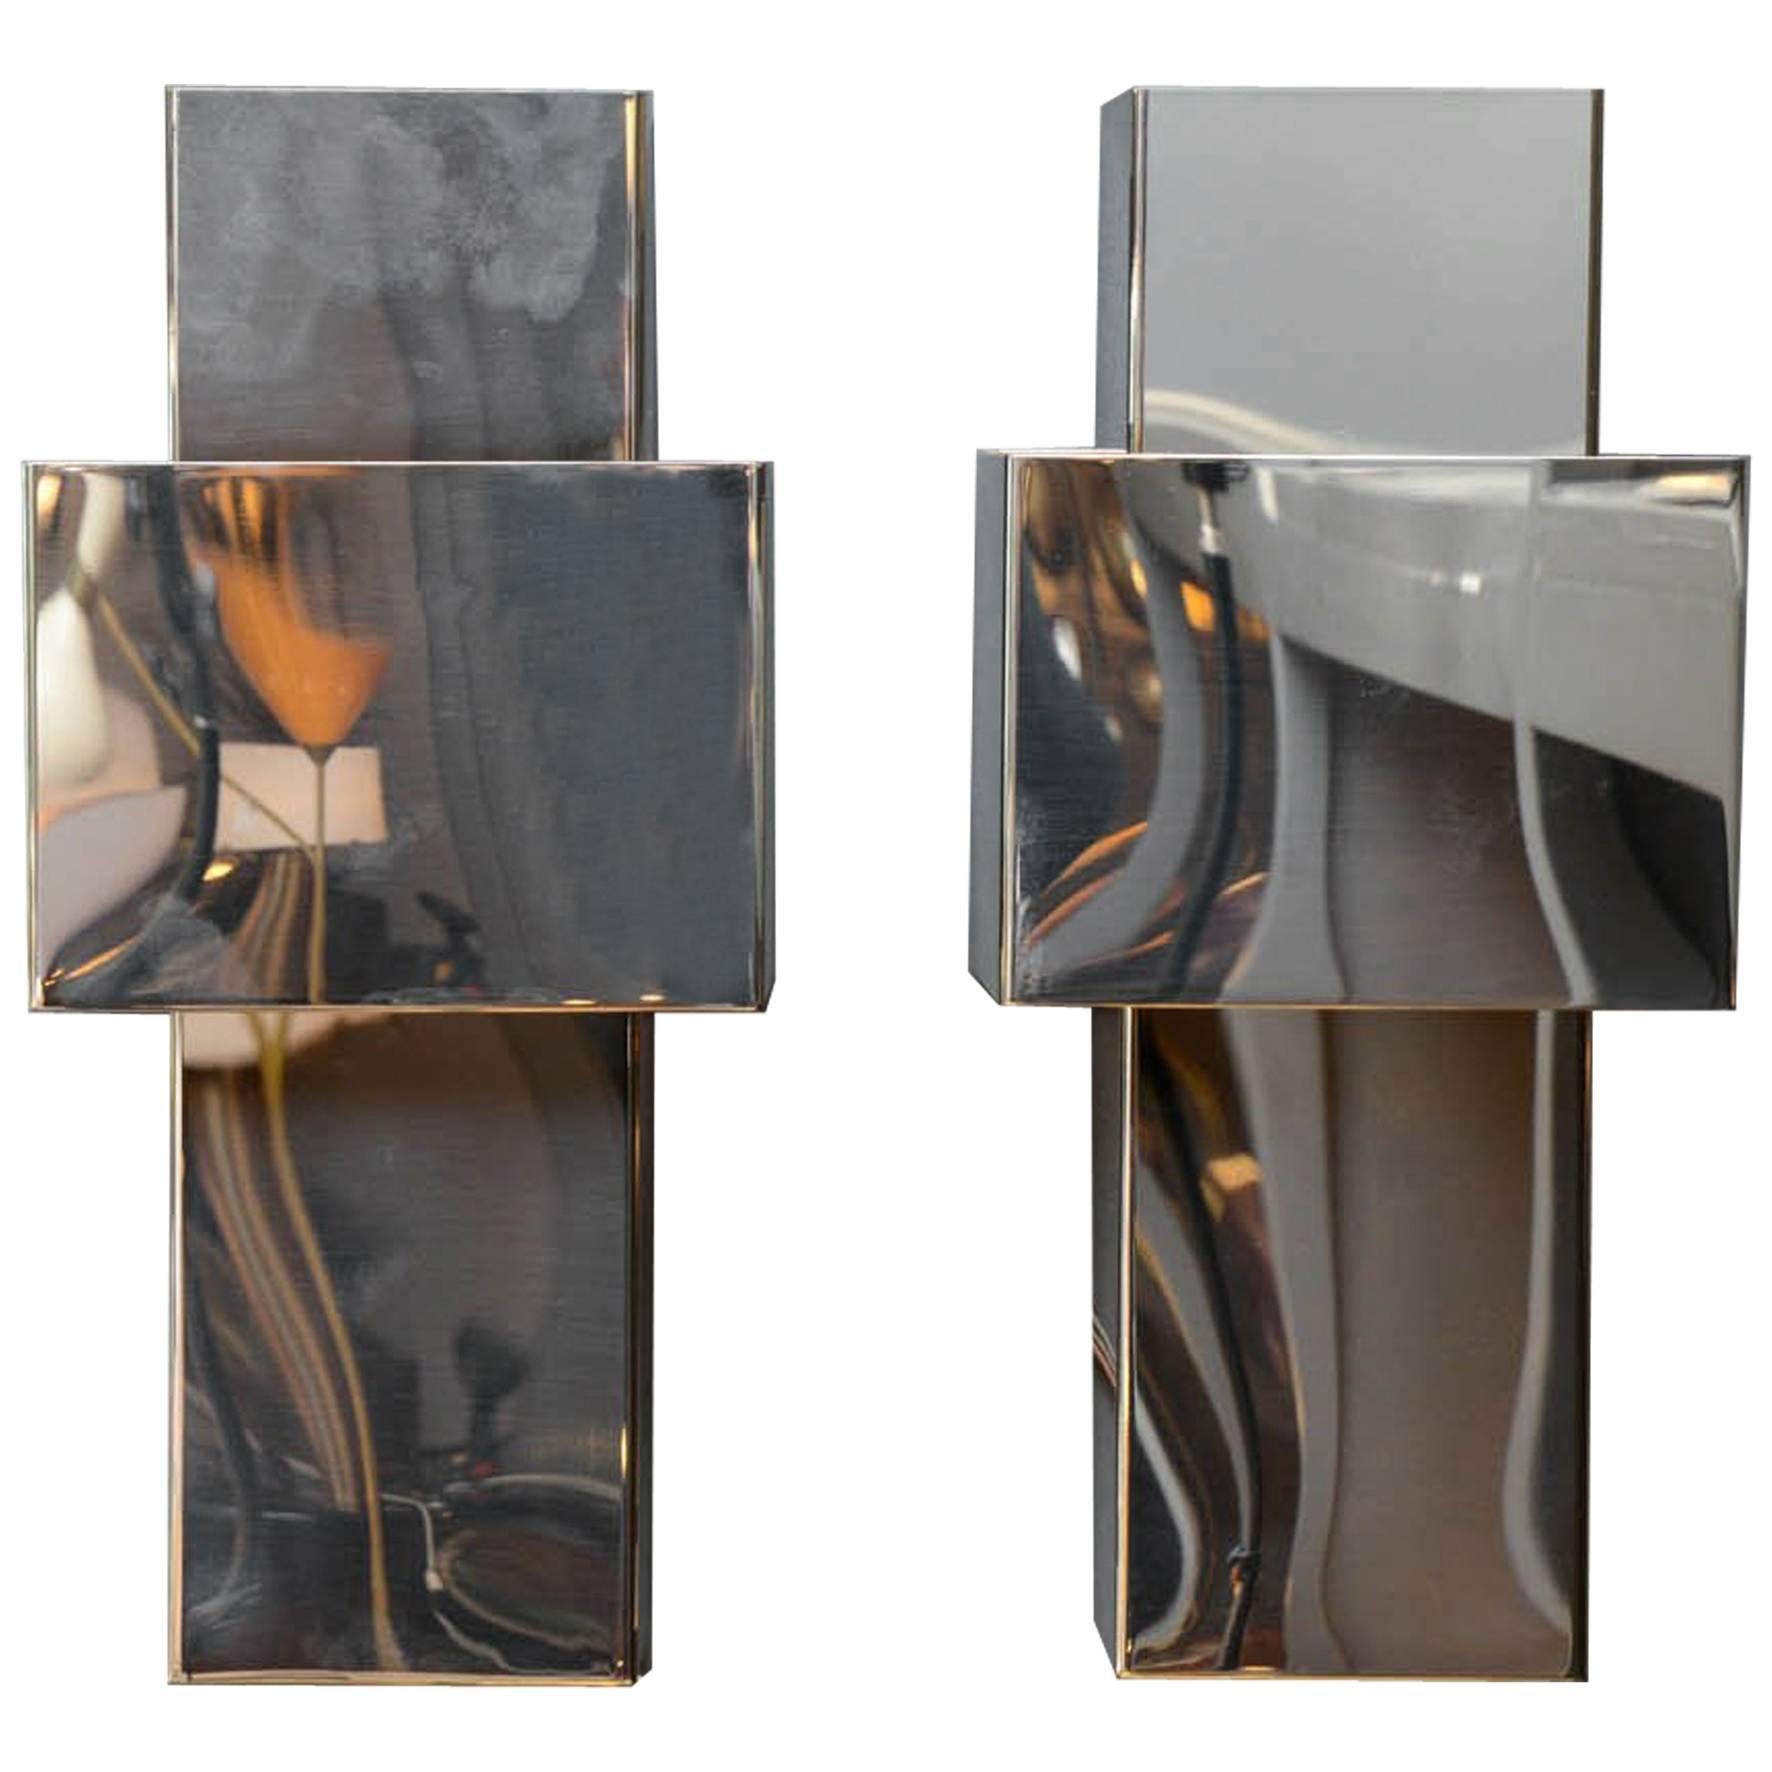 Pair of Stainless Steel and Copper "Lovelamp" Wall Sconces by Willy Rizzo